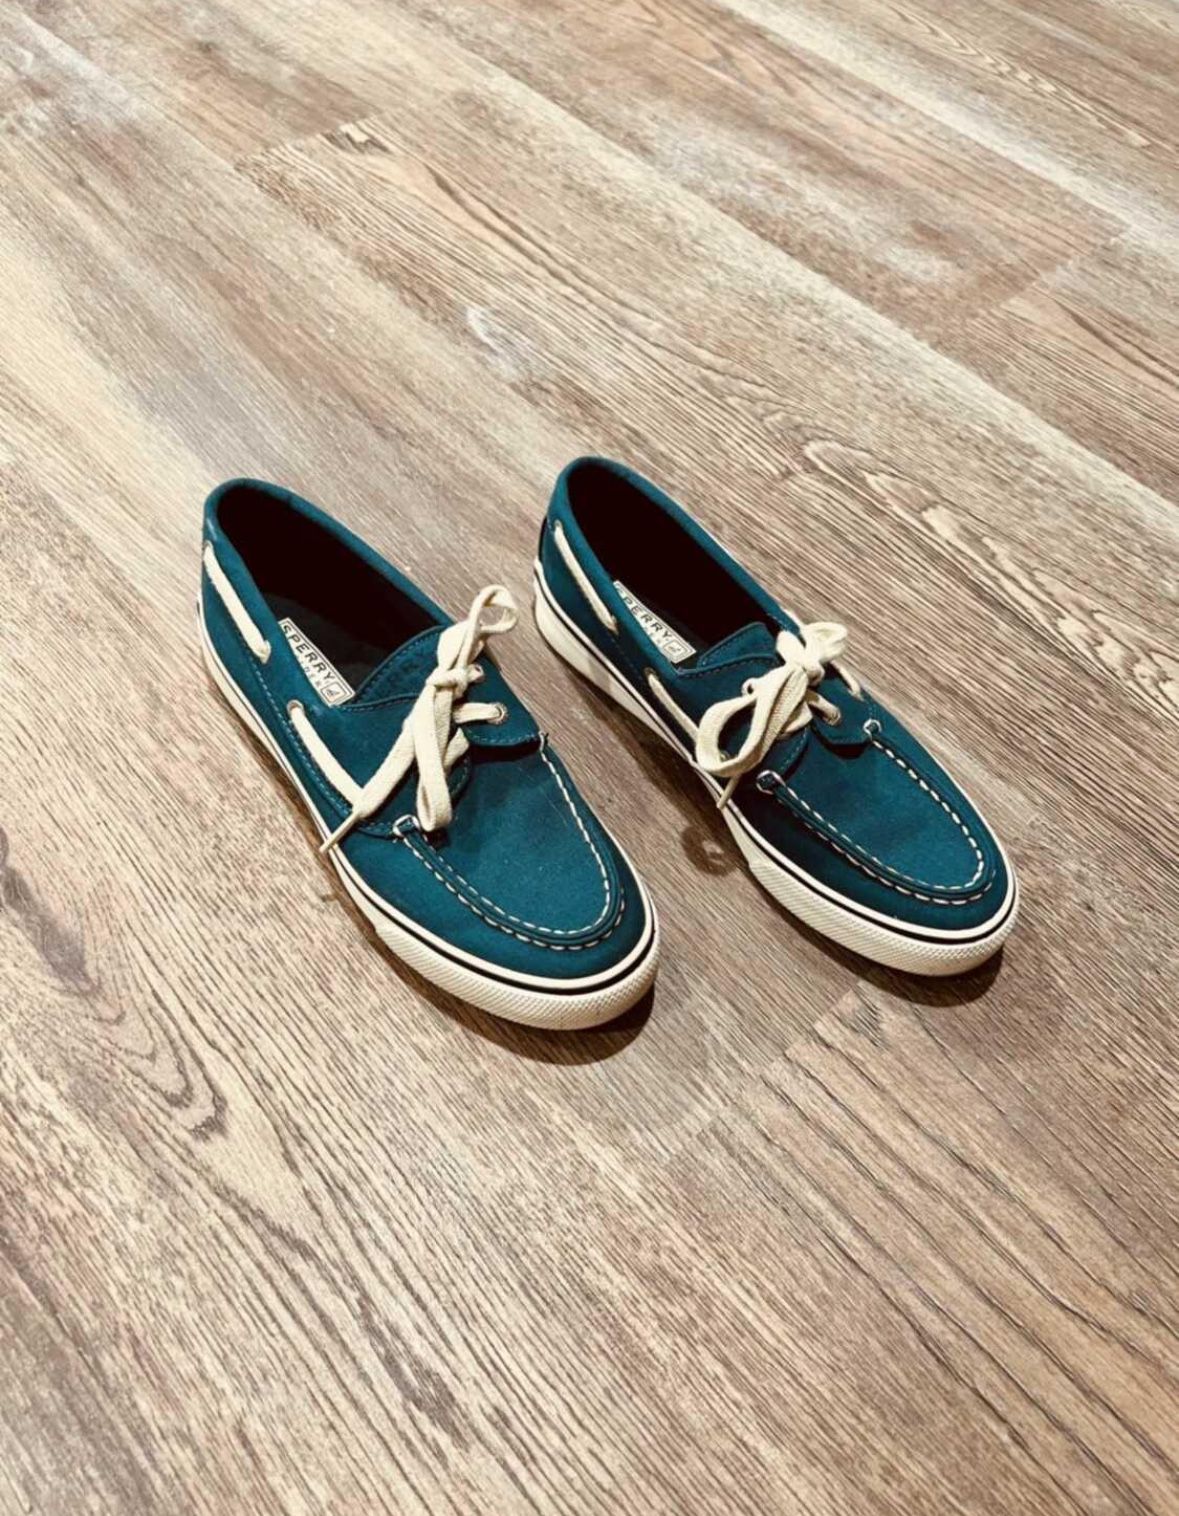 Like New 6.5 Turquoise Sperry’s